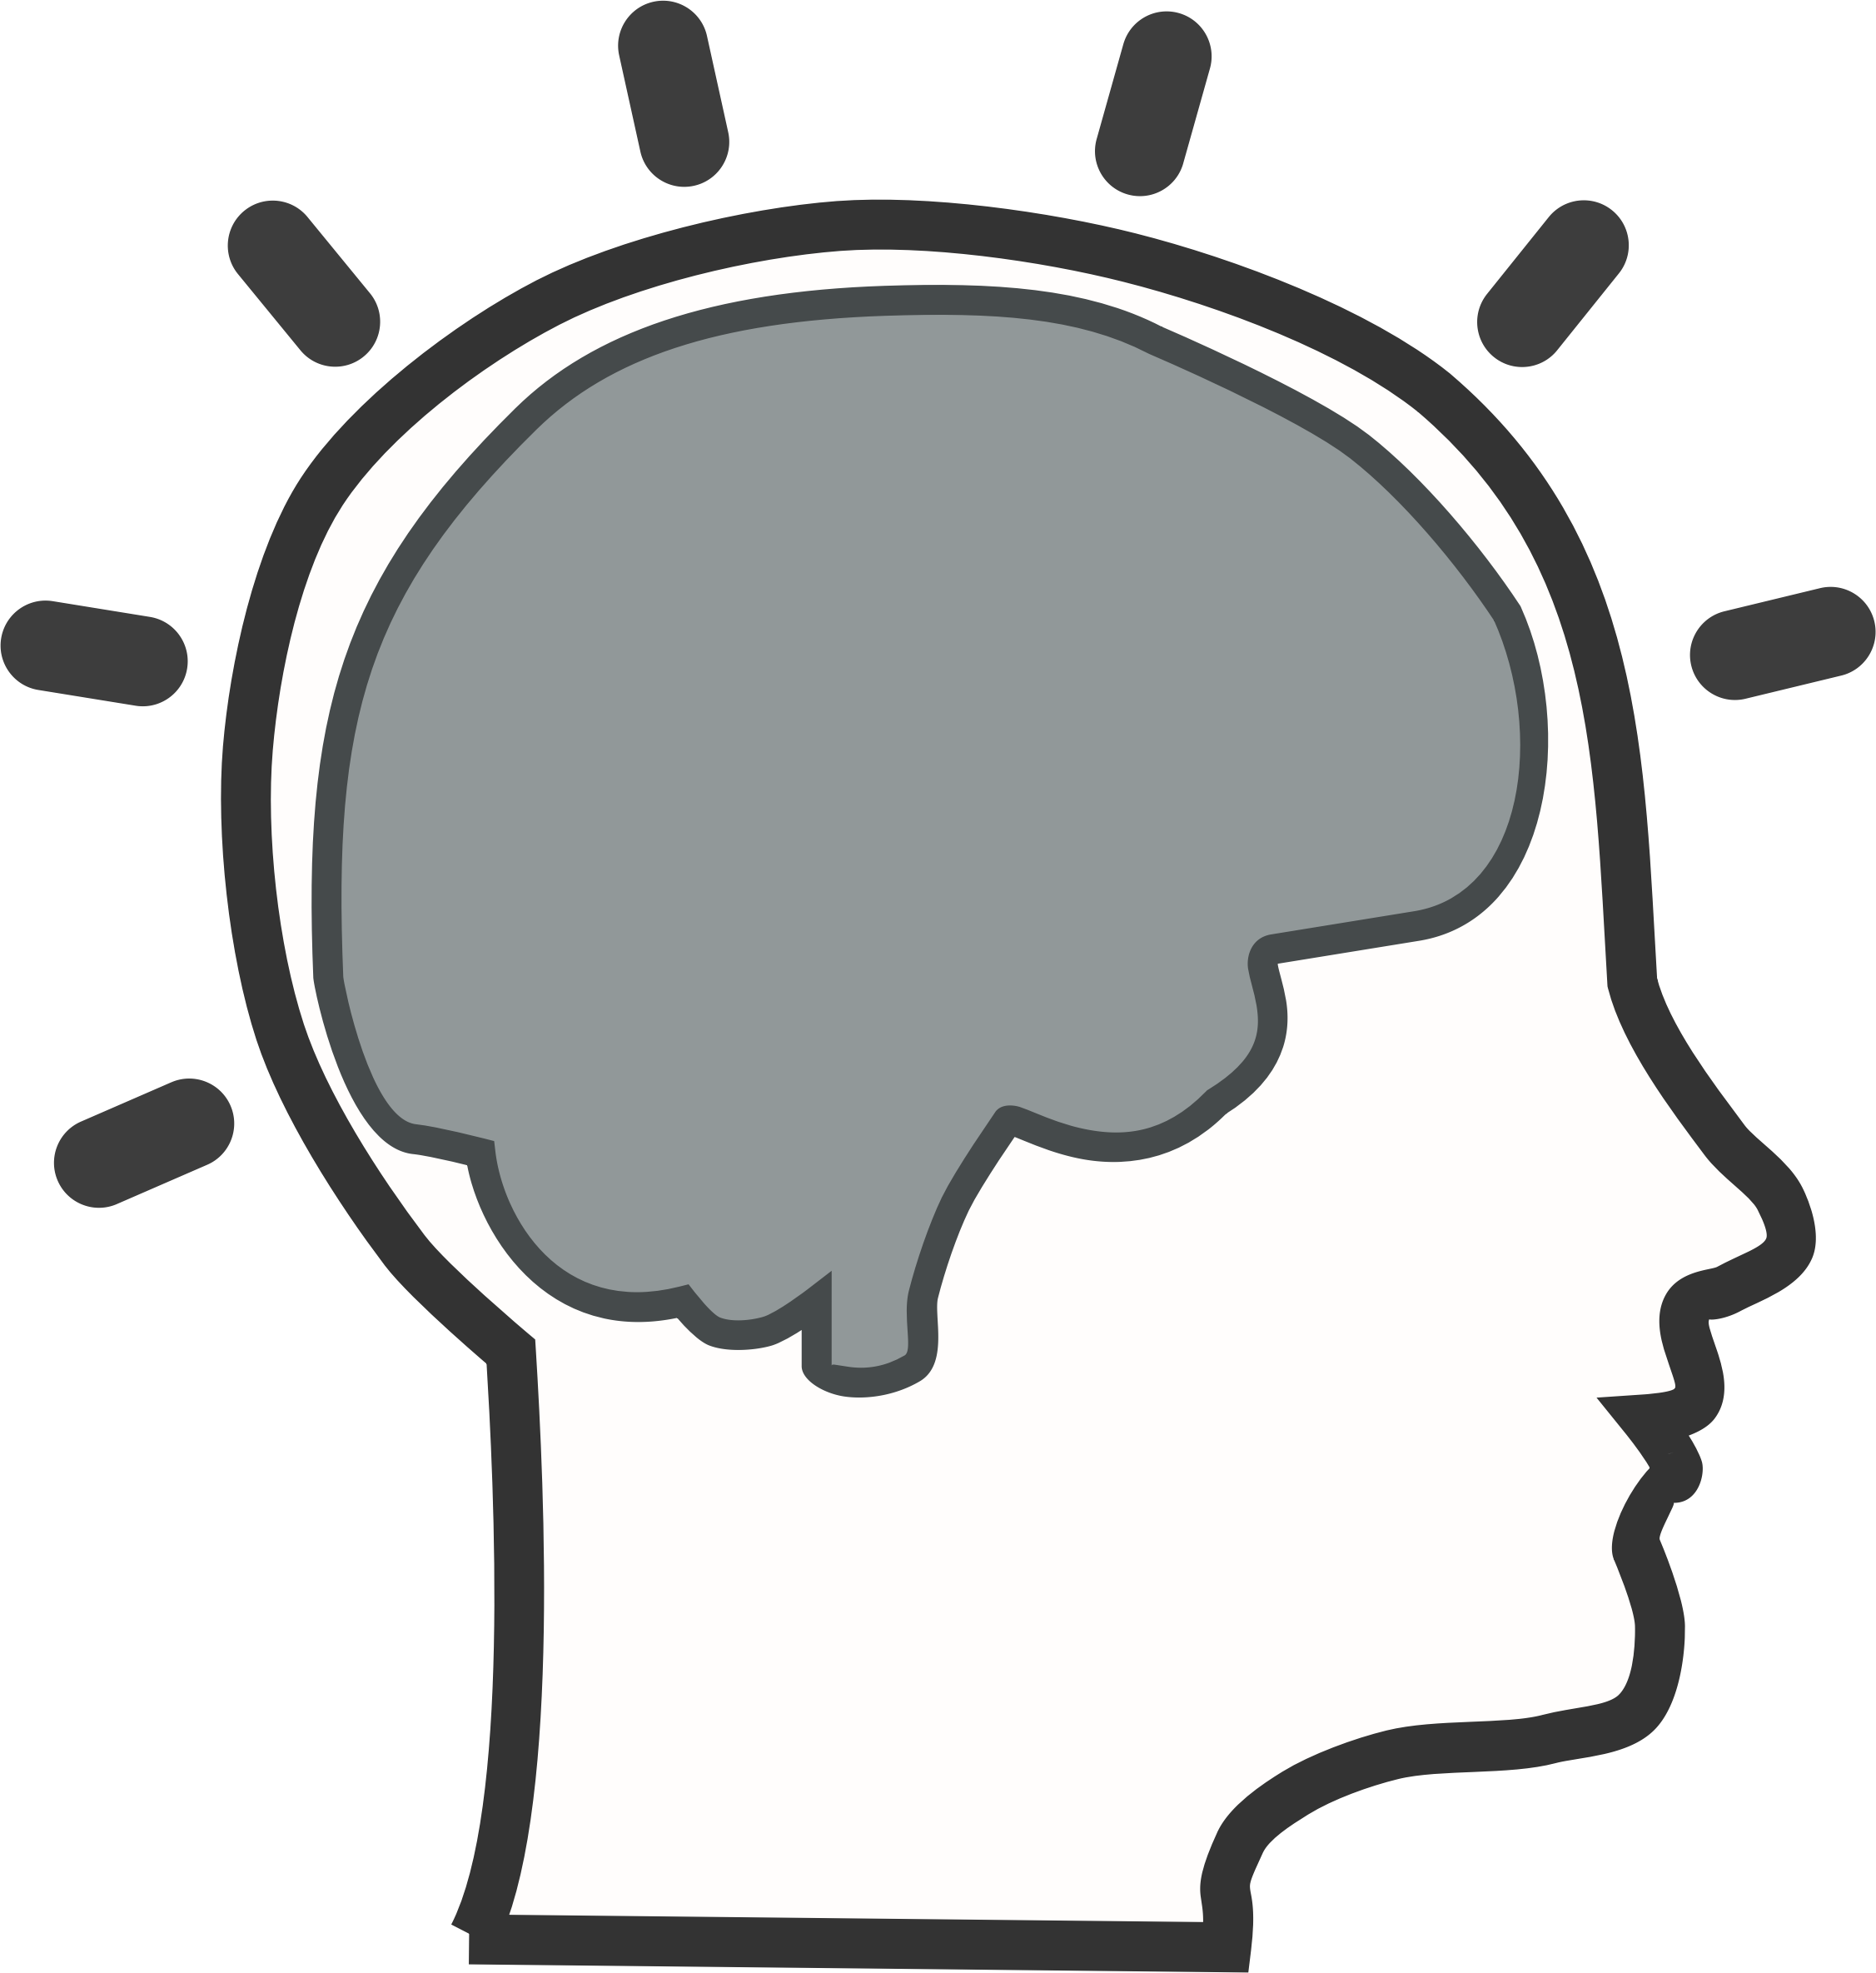 Outline Of A Brain Clipart - Outline Of A Brain Clipart (2253x2369)